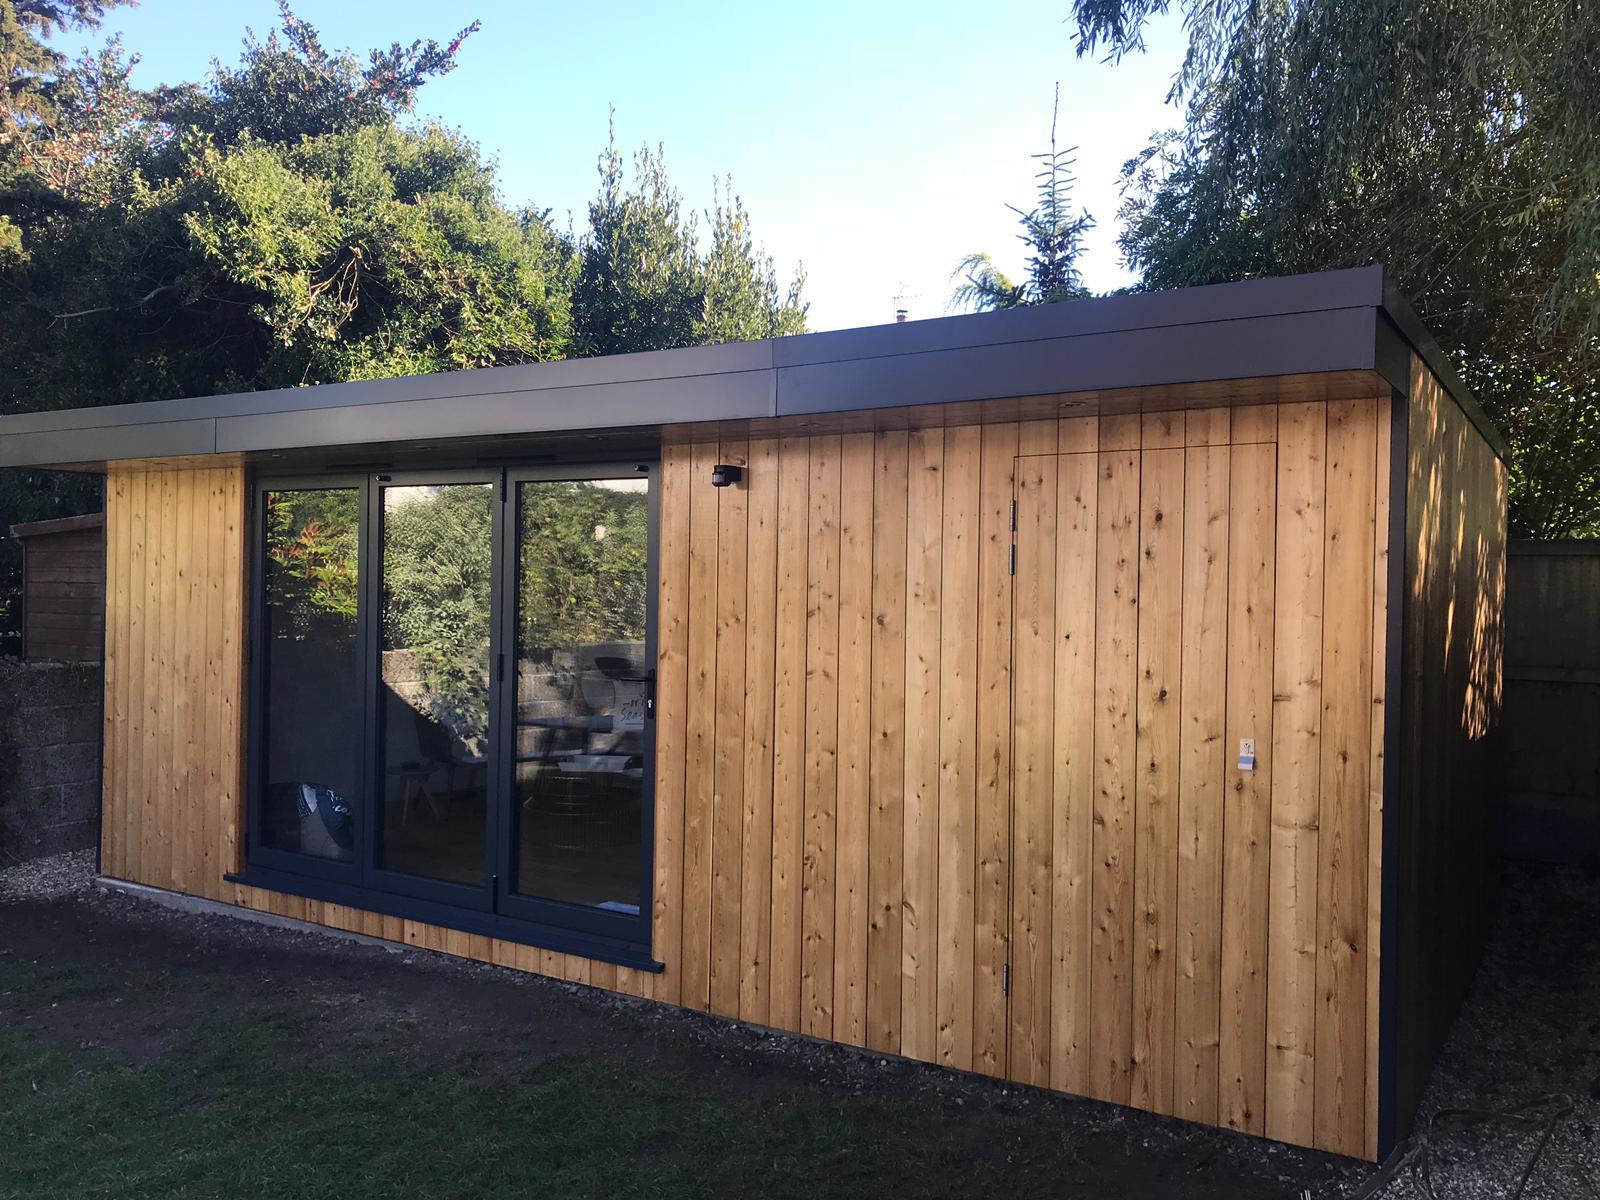 It’s not too late to build your garden room in time for summer 2017!